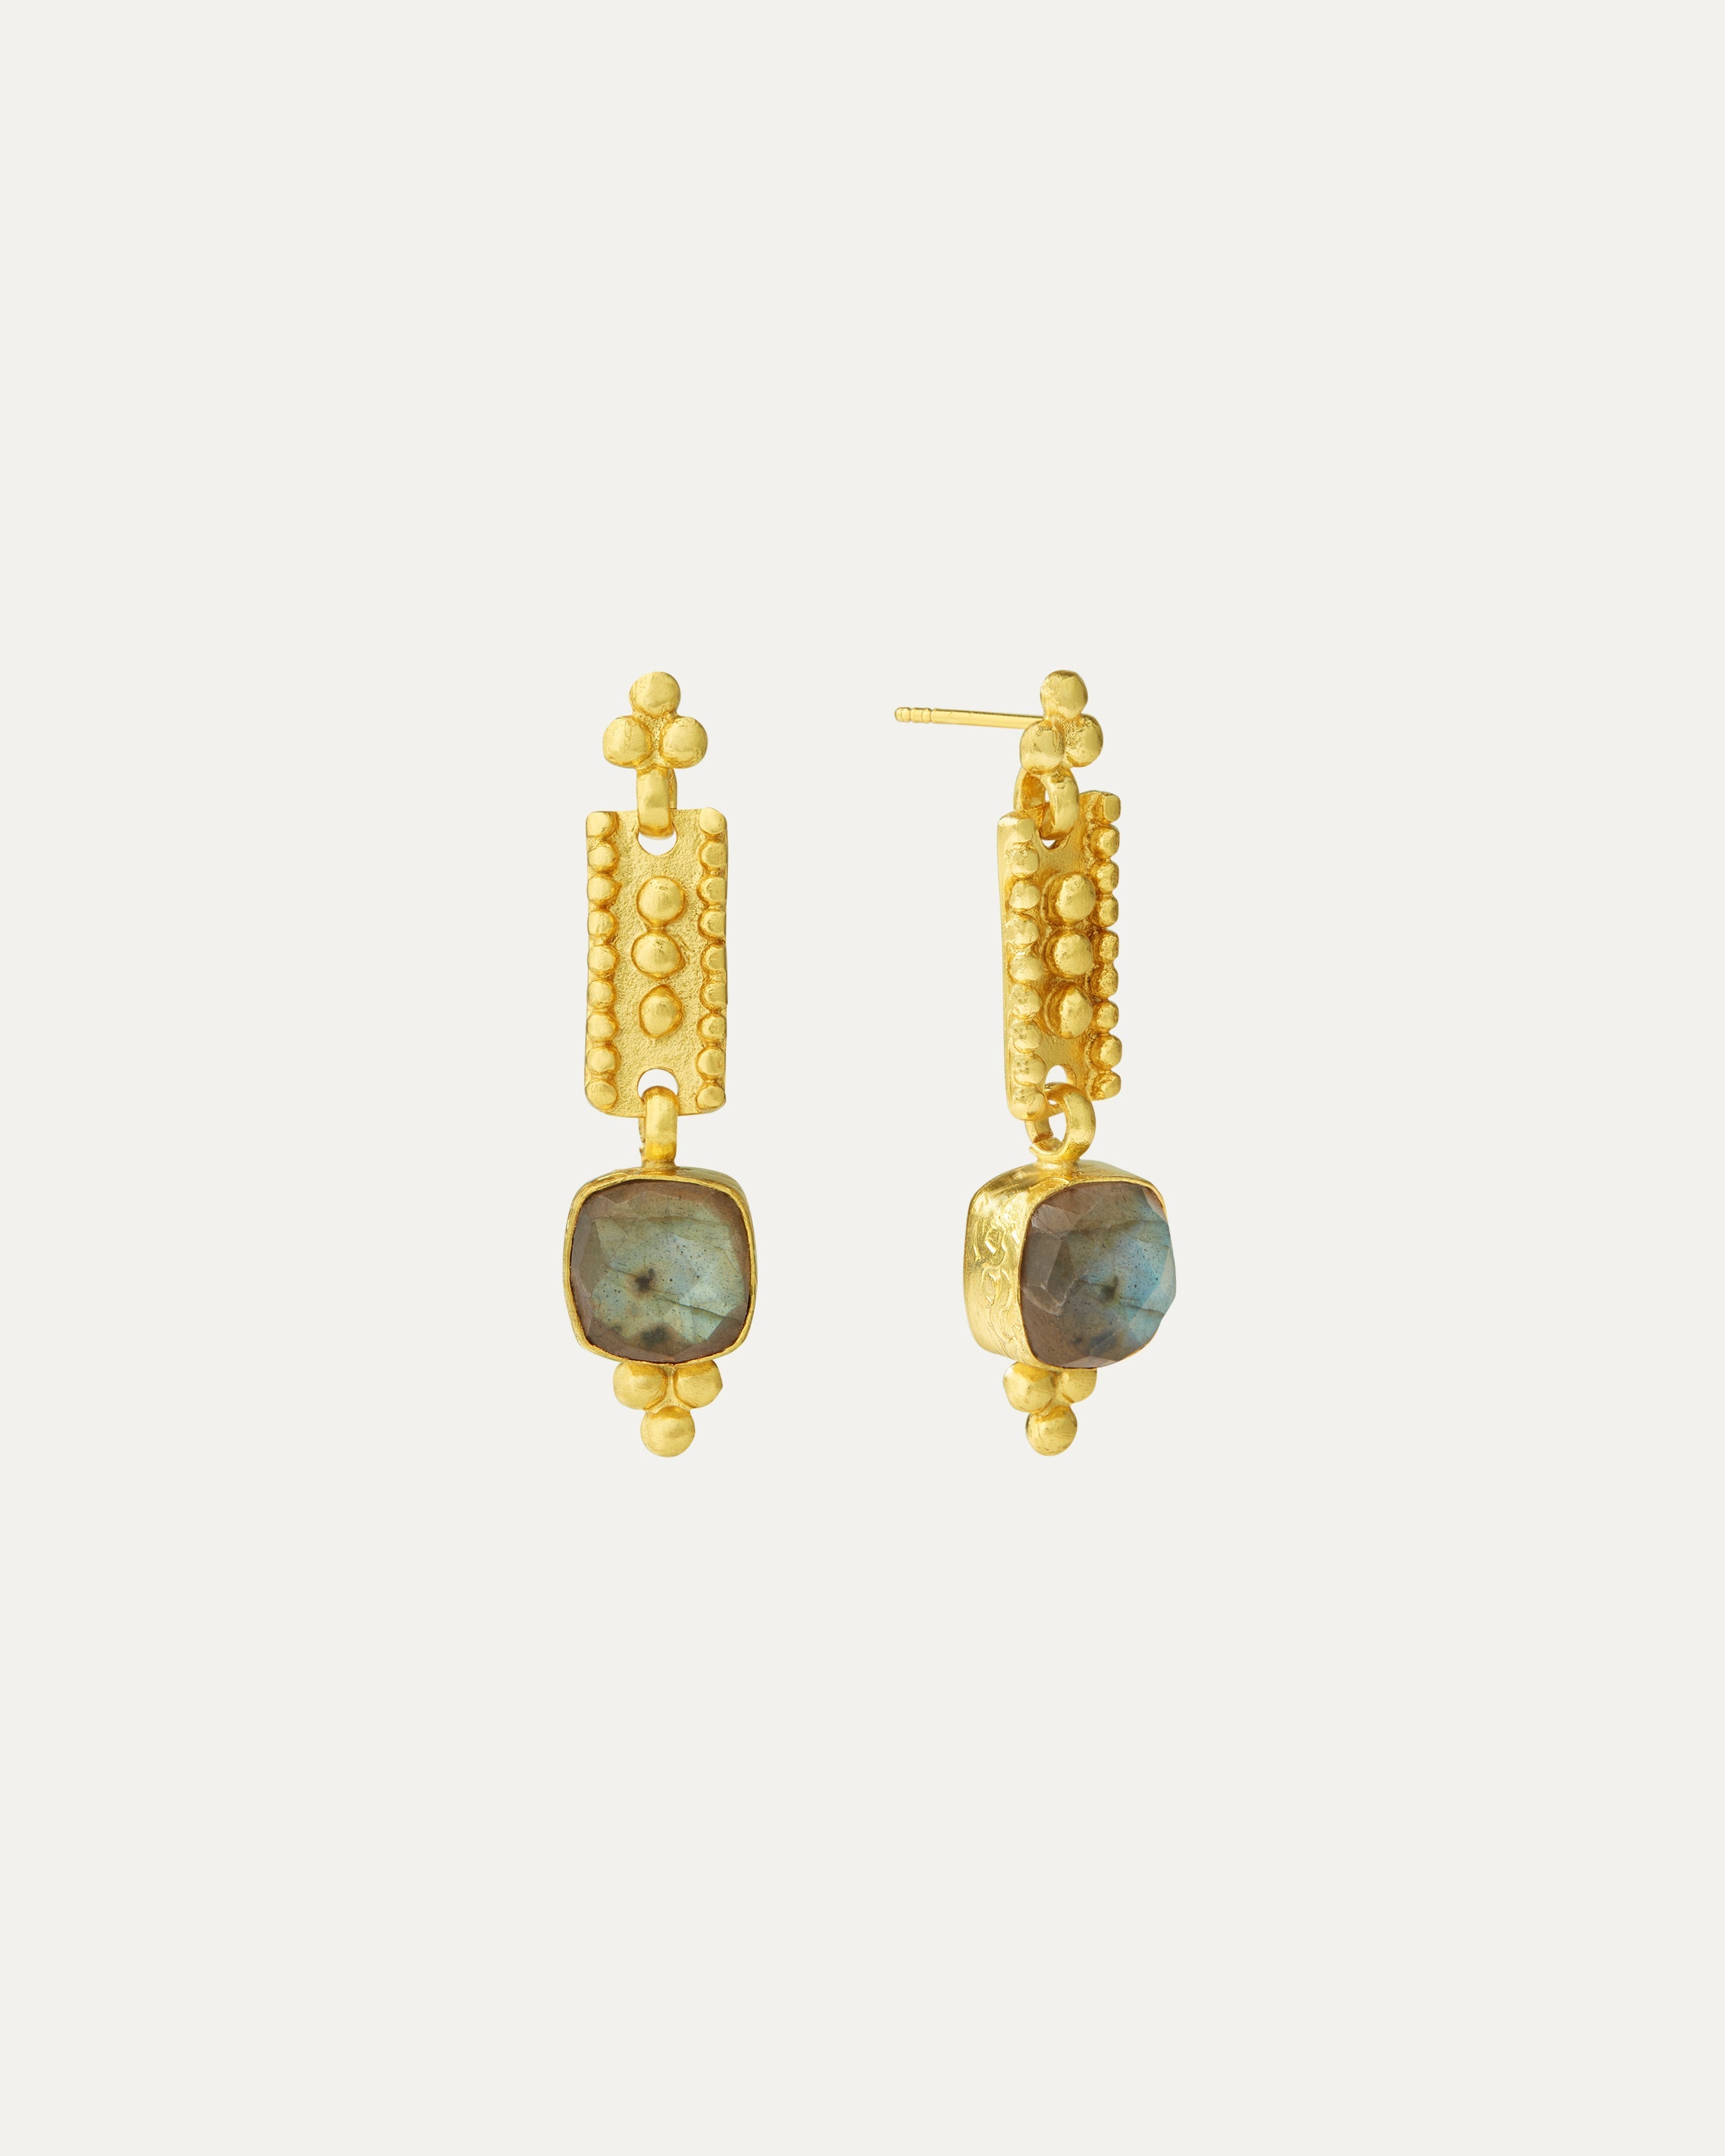 Shahrzad Labradorite Drop Earrings | Sustainable Jewellery by Ottoman Hands